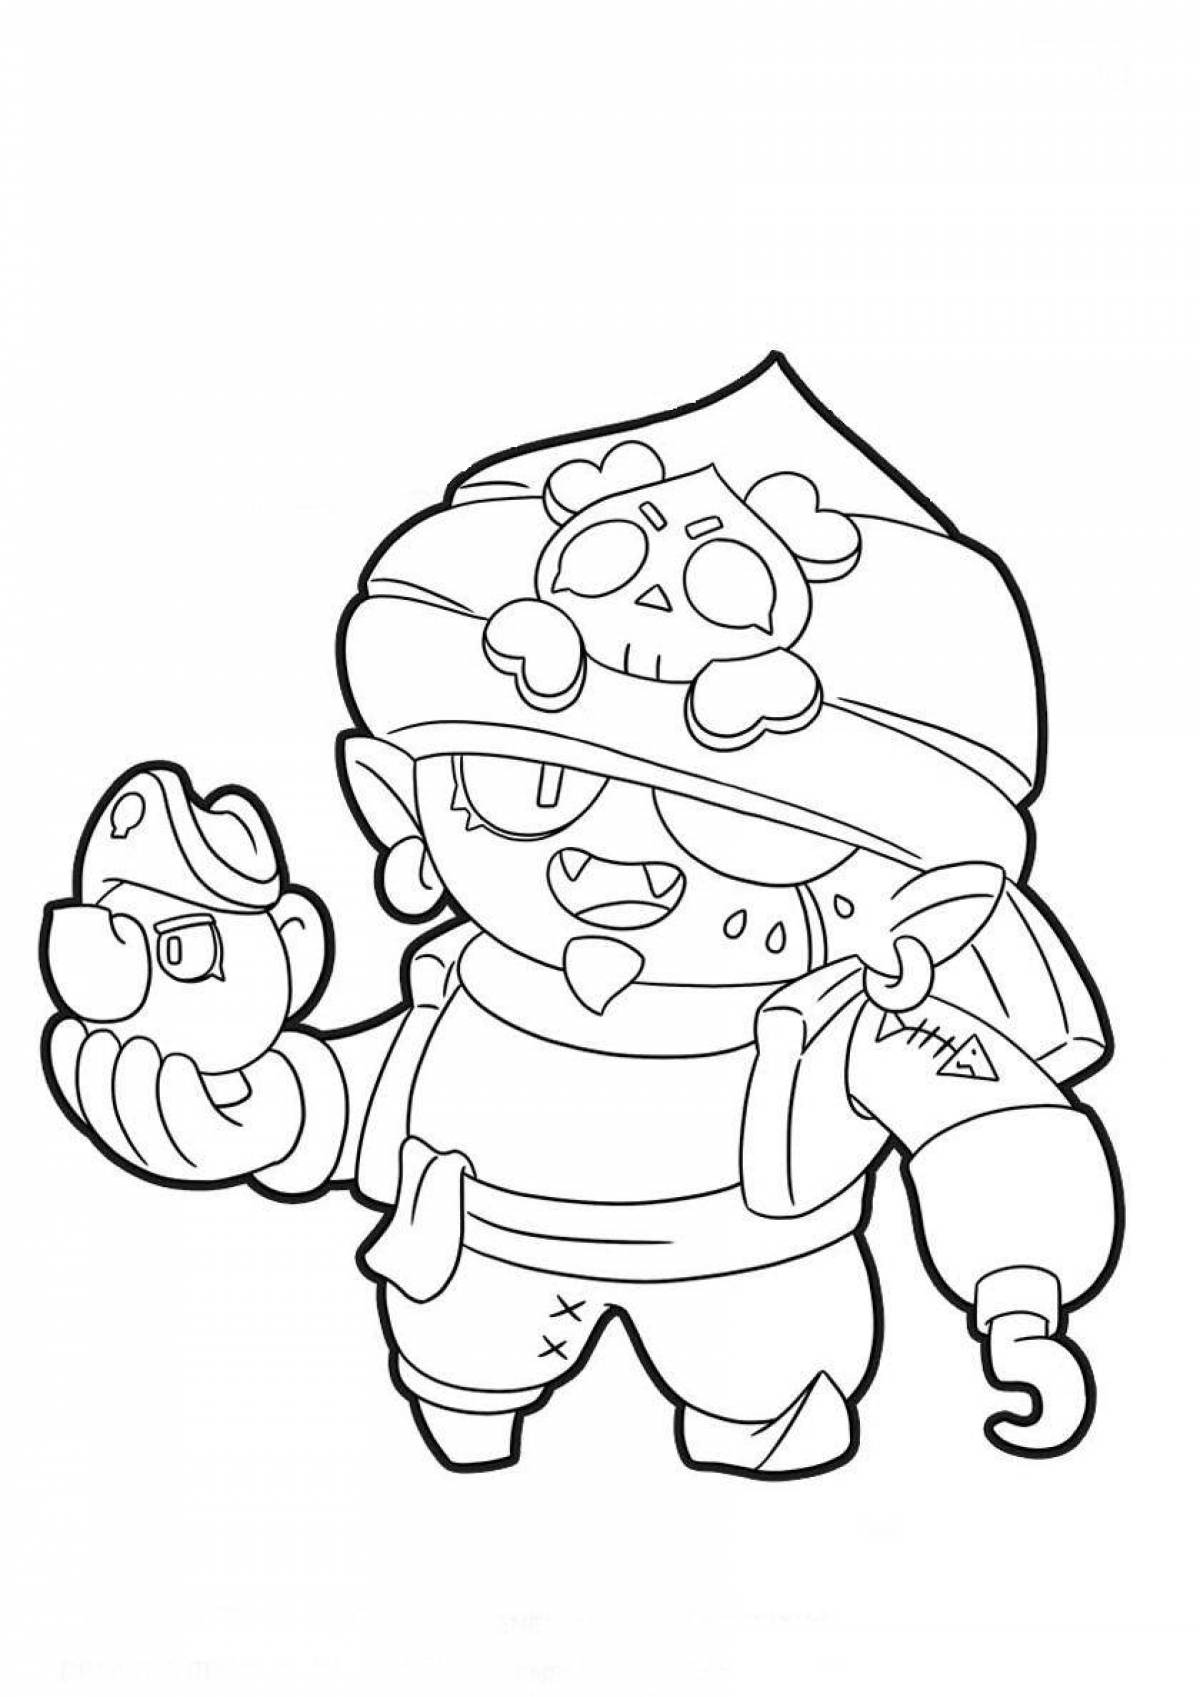 Intriguing coloring pages from brawl stars